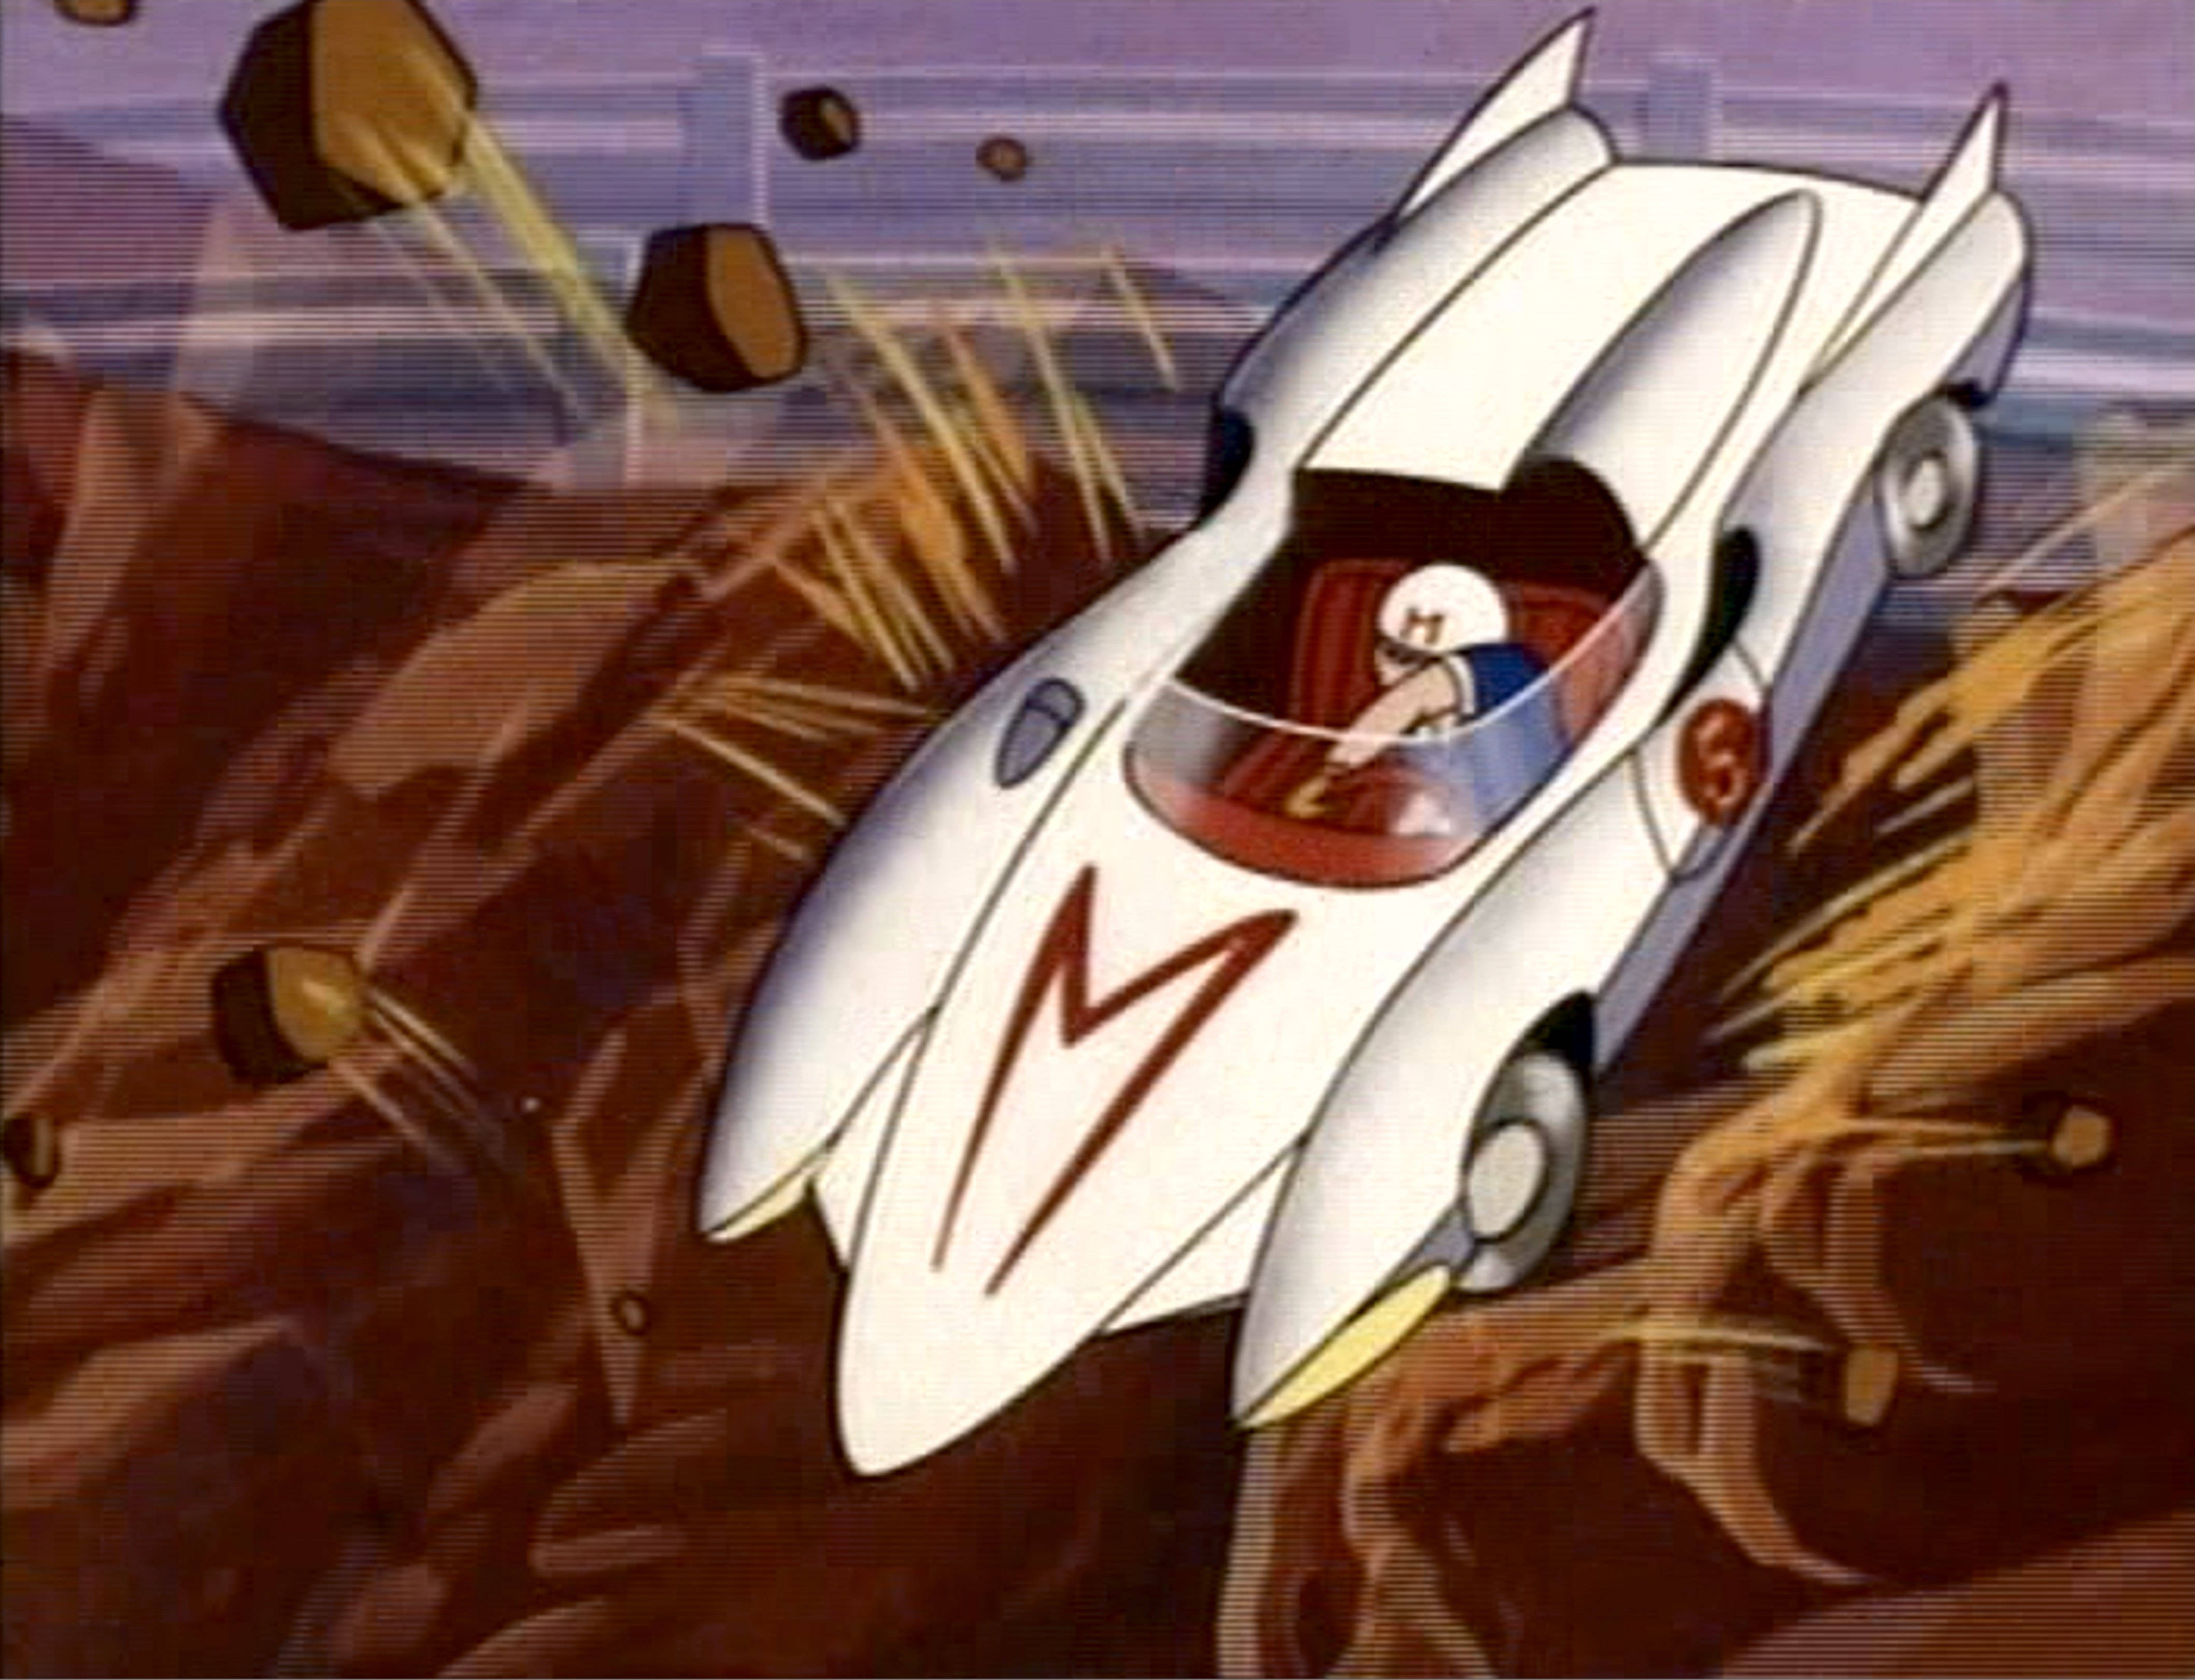 Speed Racer Mach 5 Picture - Picture of Speed Racer in the Mach 5